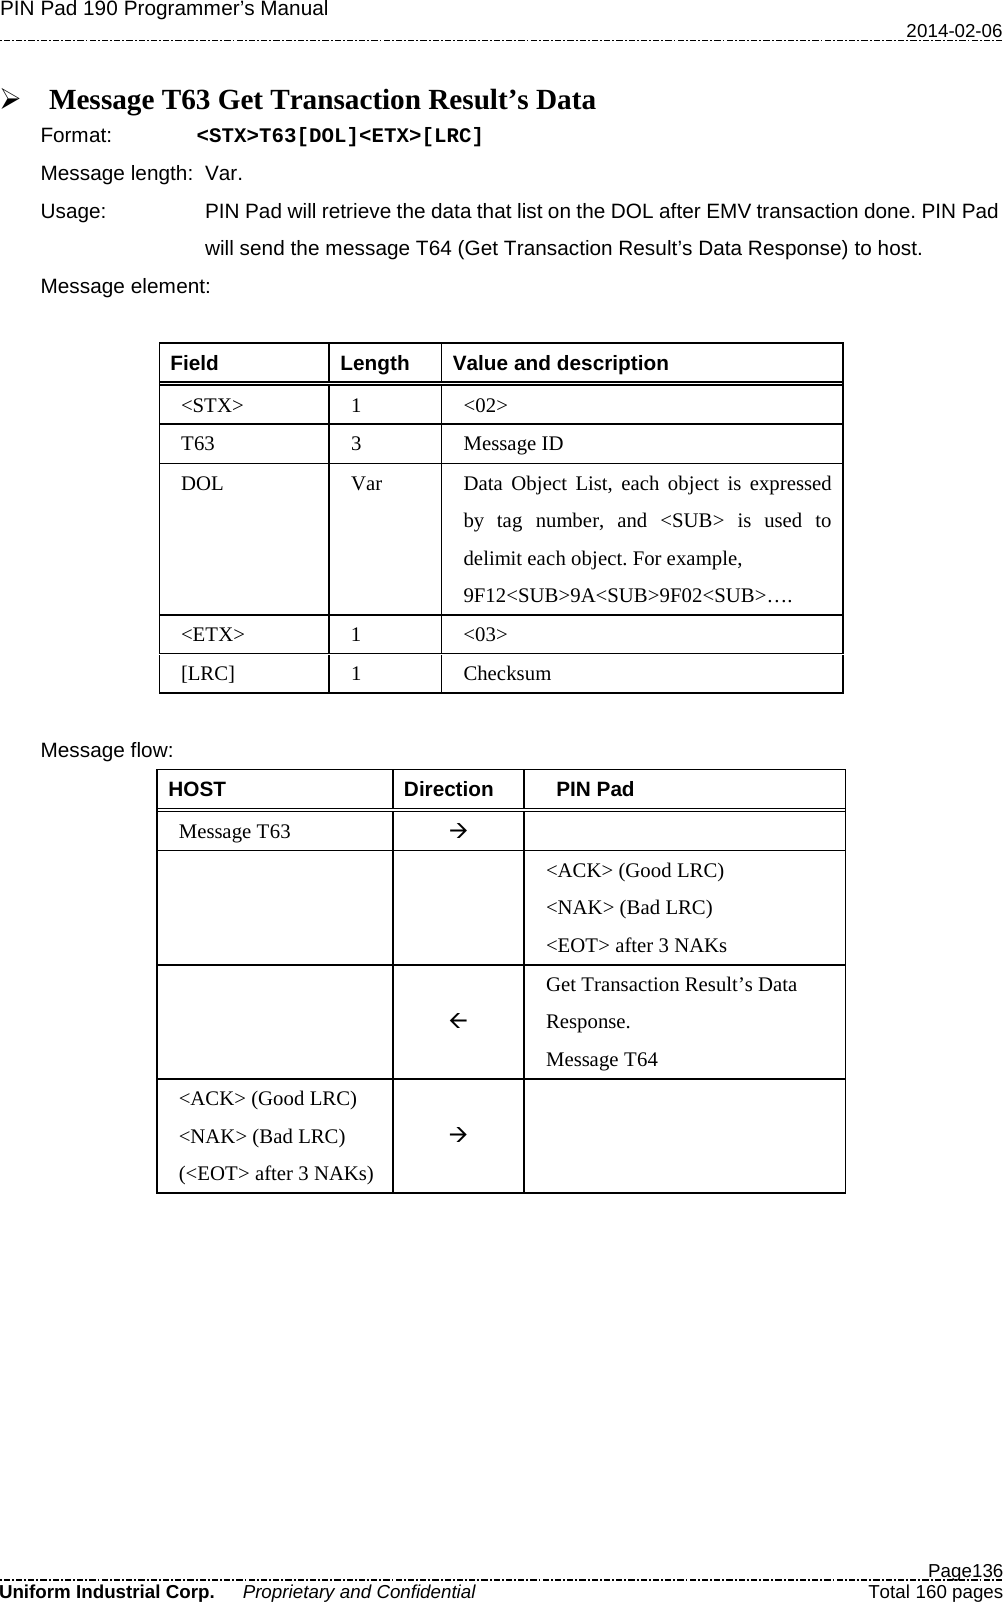 PIN Pad 190 Programmer’s Manual   2014-02-06  Page136 Uniform Industrial Corp. Proprietary and Confidential  Total 160 pages   Message T63 Get Transaction Result’s Data Format:   &lt;STX&gt;T63[DOL]&lt;ETX&gt;[LRC] Message length: Var.   Usage: PIN Pad will retrieve the data that list on the DOL after EMV transaction done. PIN Pad will send the message T64 (Get Transaction Result’s Data Response) to host. Message element:    Field  Length  Value and description &lt;STX&gt;  1  &lt;02&gt; T63  3  Message ID DOL Var Data Object List, each object is expressed by tag number, and &lt;SUB&gt; is used to delimit each object. For example, 9F12&lt;SUB&gt;9A&lt;SUB&gt;9F02&lt;SUB&gt;…. &lt;ETX&gt;  1  &lt;03&gt; [LRC]  1  Checksum  Message flow: HOST Direction   PIN Pad Message T63     &lt;ACK&gt; (Good LRC) &lt;NAK&gt; (Bad LRC) &lt;EOT&gt; after 3 NAKs   Get Transaction Result’s Data Response. Message T64 &lt;ACK&gt; (Good LRC) &lt;NAK&gt; (Bad LRC) (&lt;EOT&gt; after 3 NAKs)    